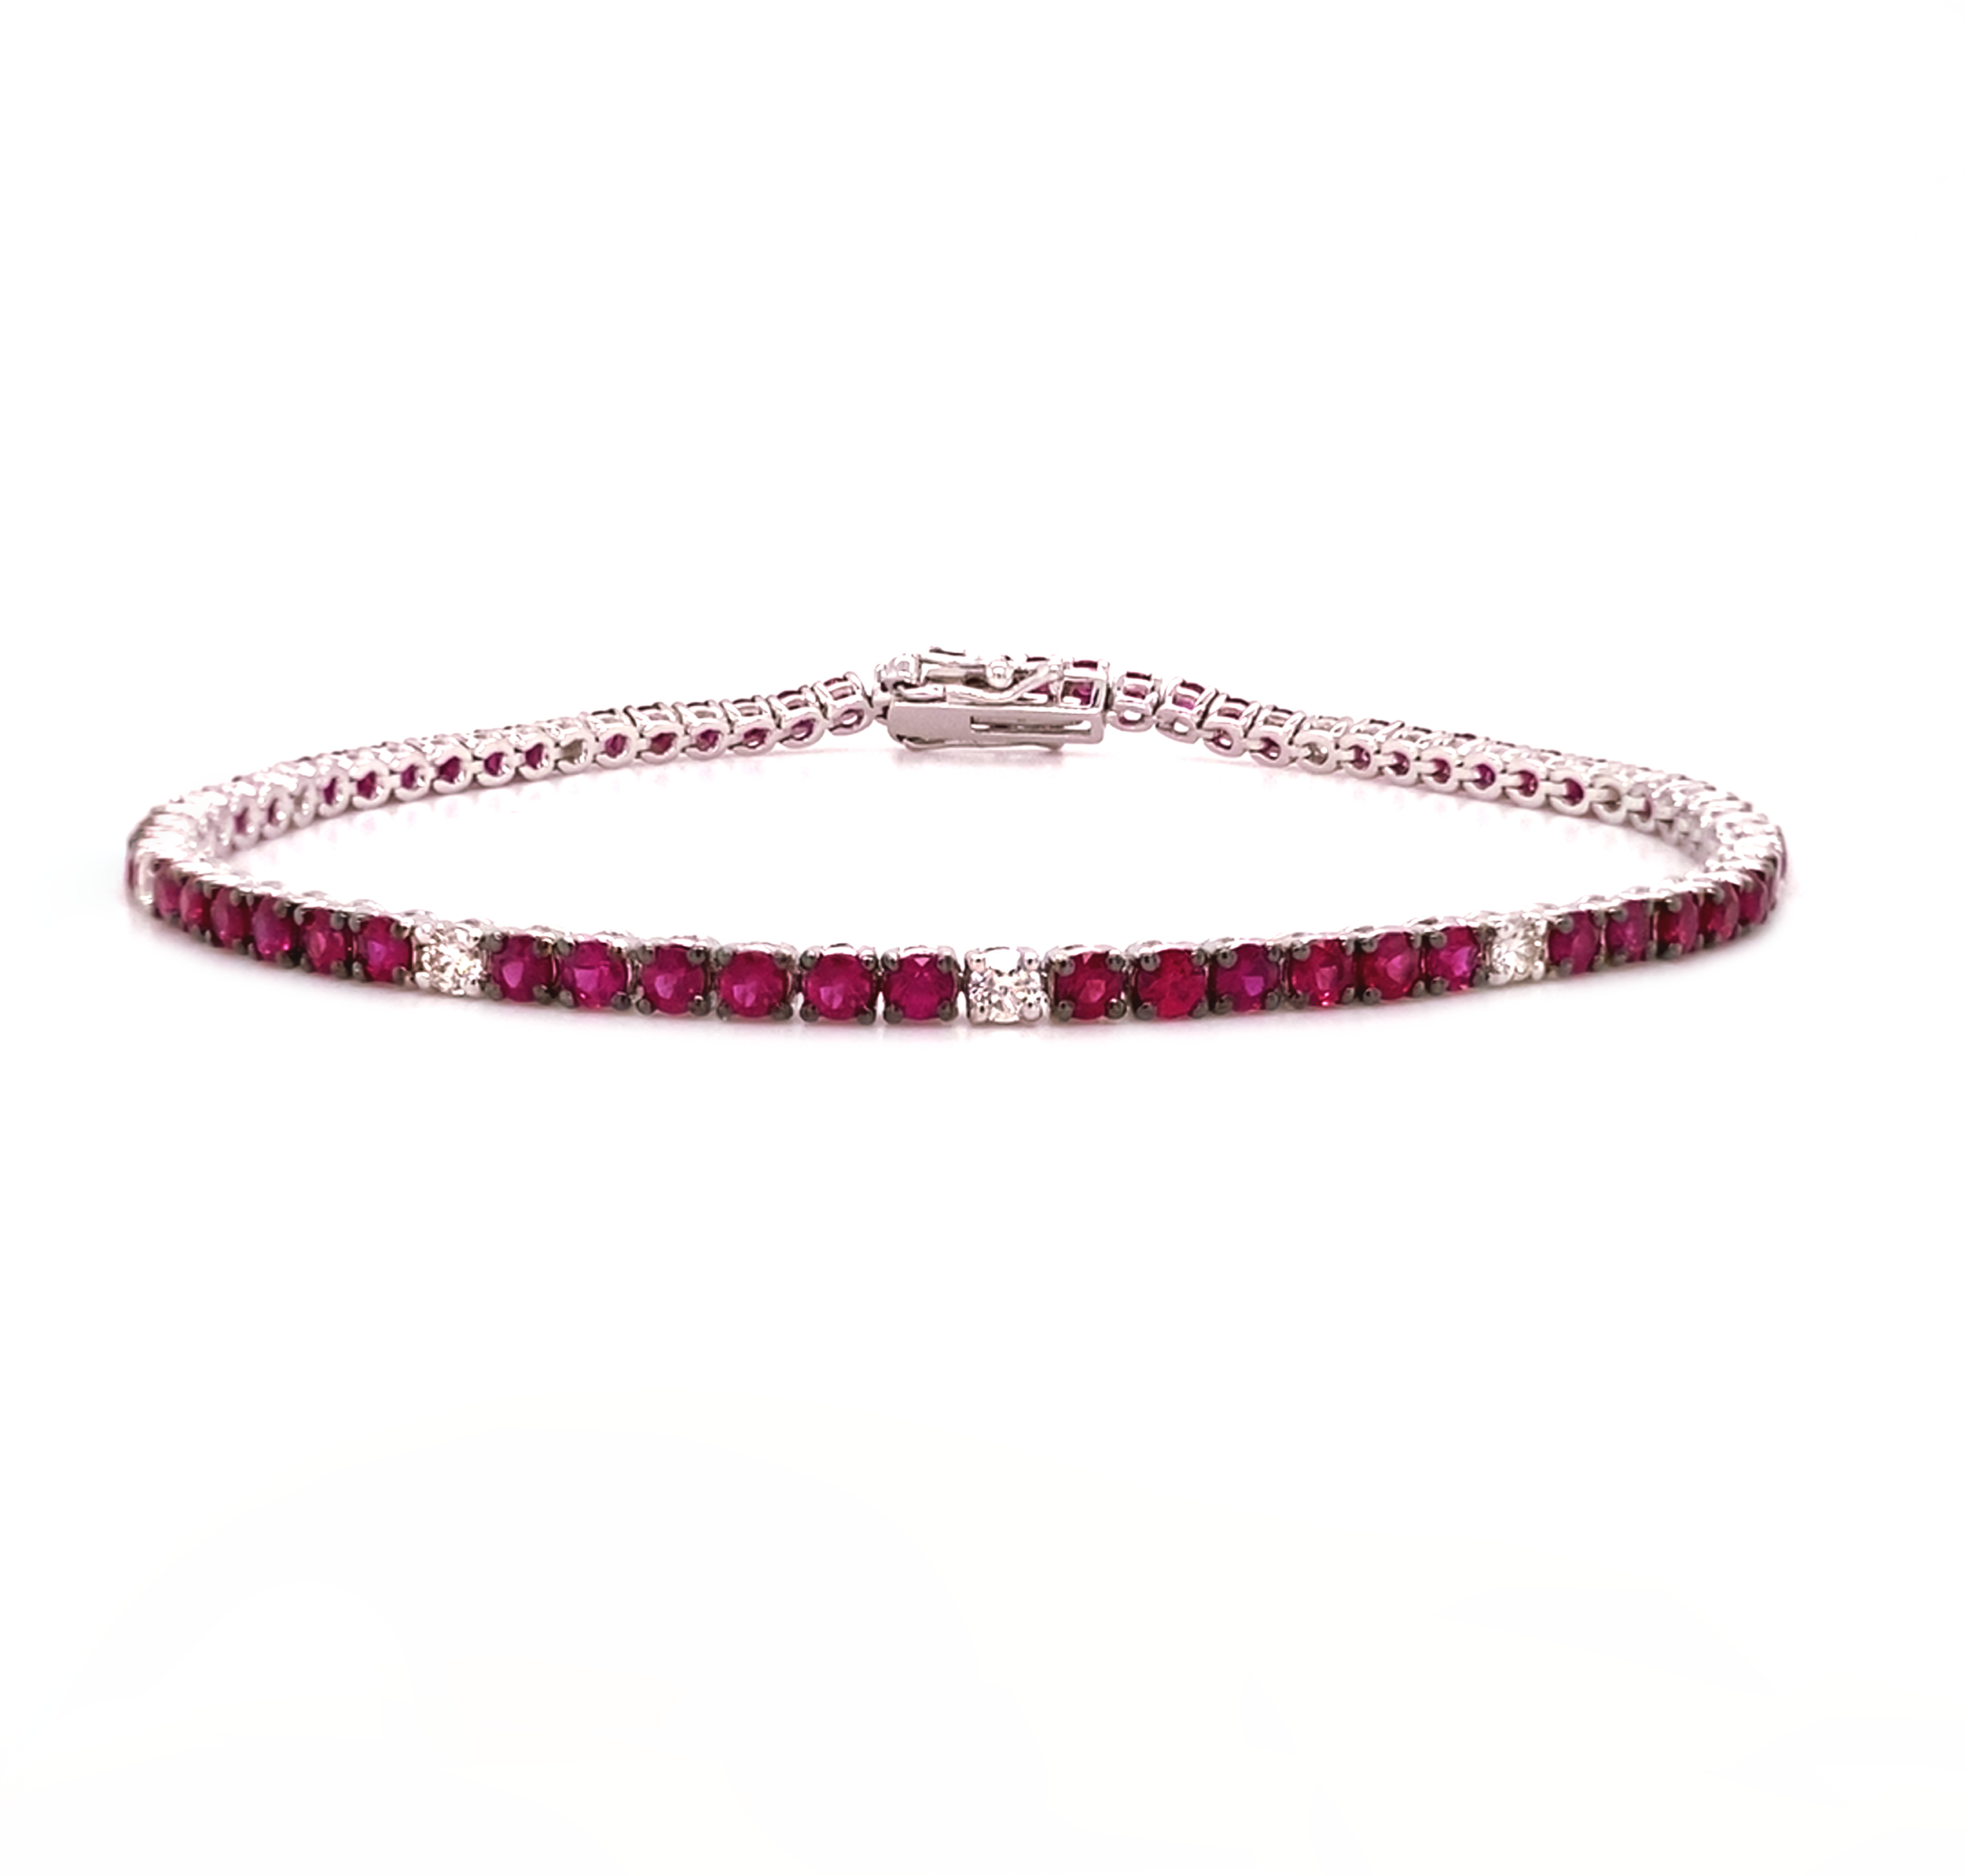 NO RESERVE*** 6.15 Carat Natural Rubies and 0.41 Fancy Color Diamonds Tennis  Riviera - 14 kt. White gold - Bracelet Rubies - Diamond - Catawiki